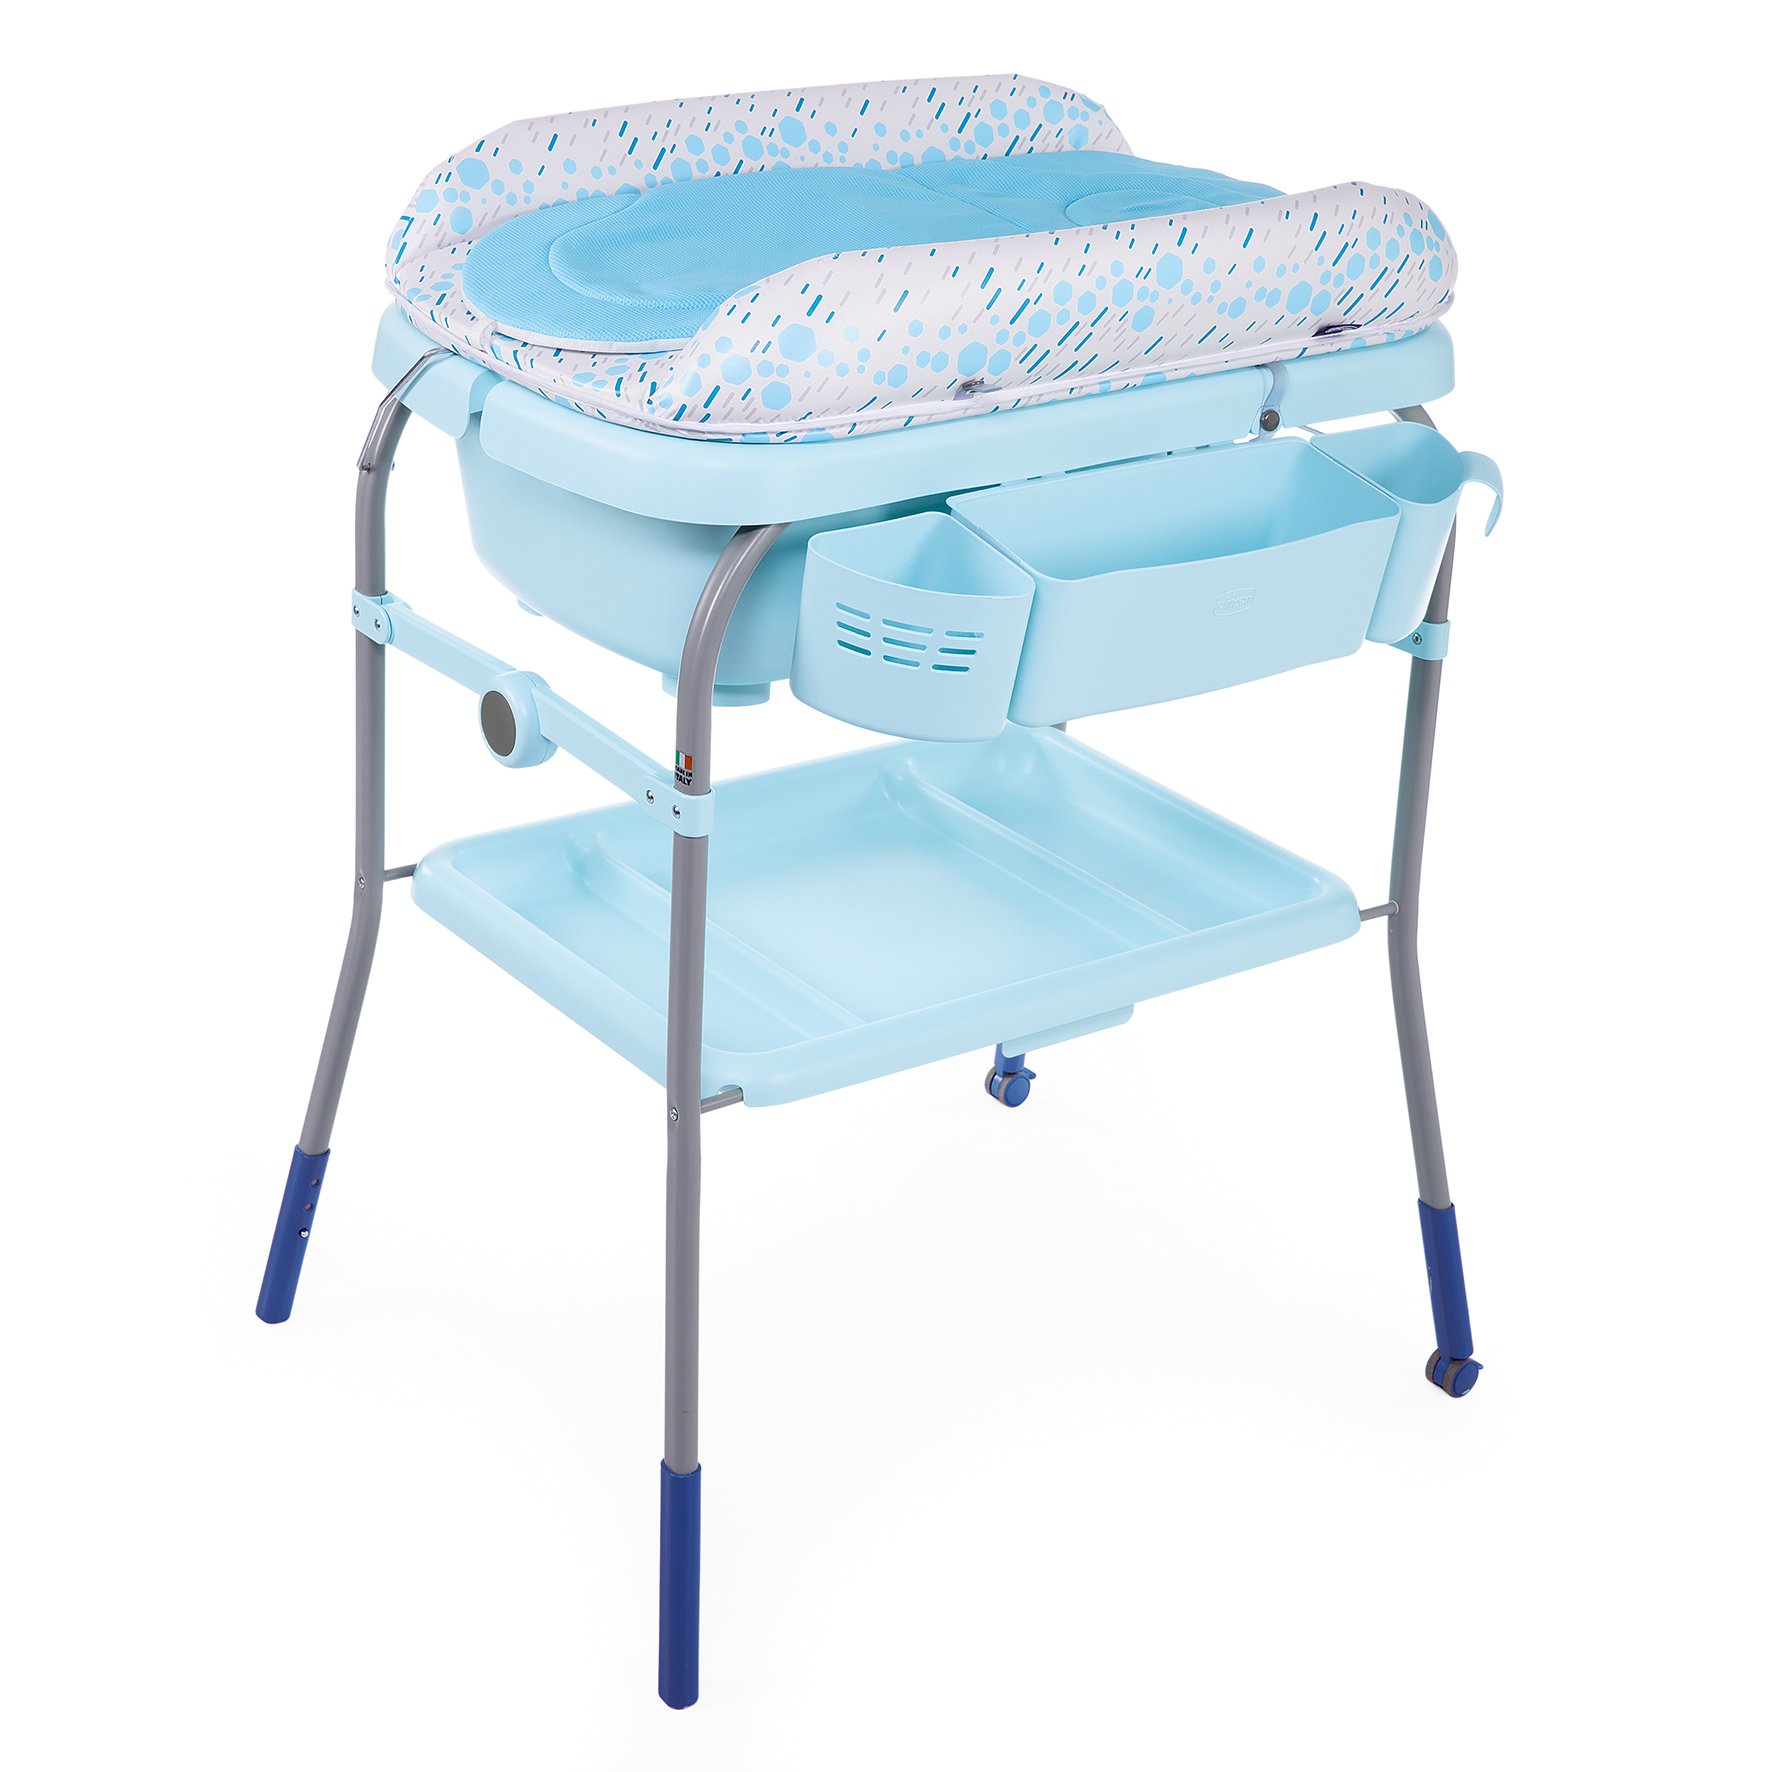 Chicco Baby Stroller For Bathing And Changing, Blue Color